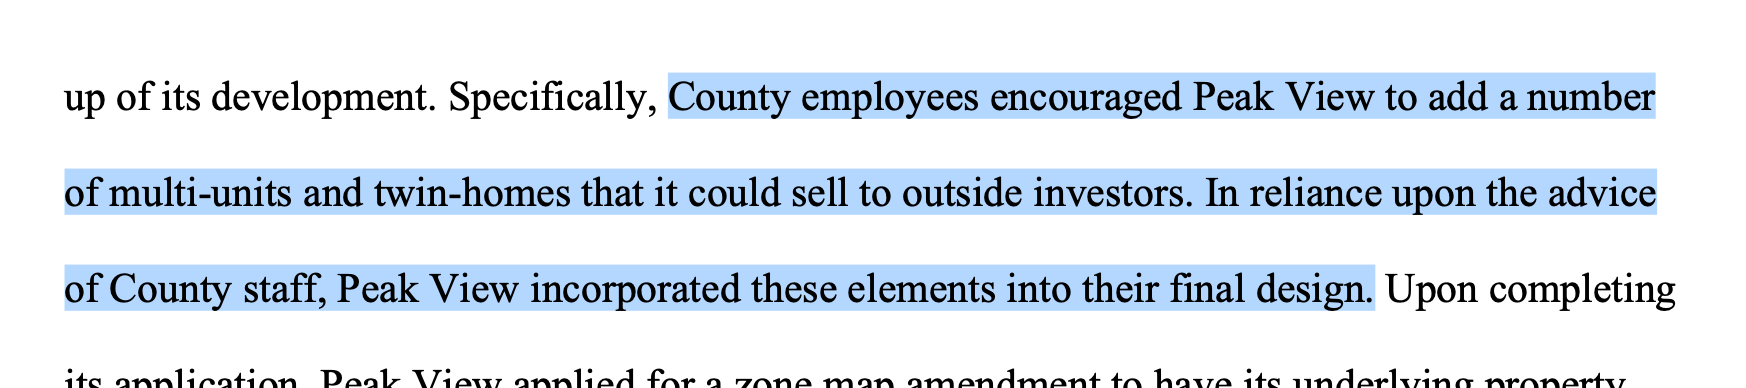 selected text from the linked document claiming that "county employees encouraged Peak View to add a number of multi-units and twin-homes that it could sell to outside investors."